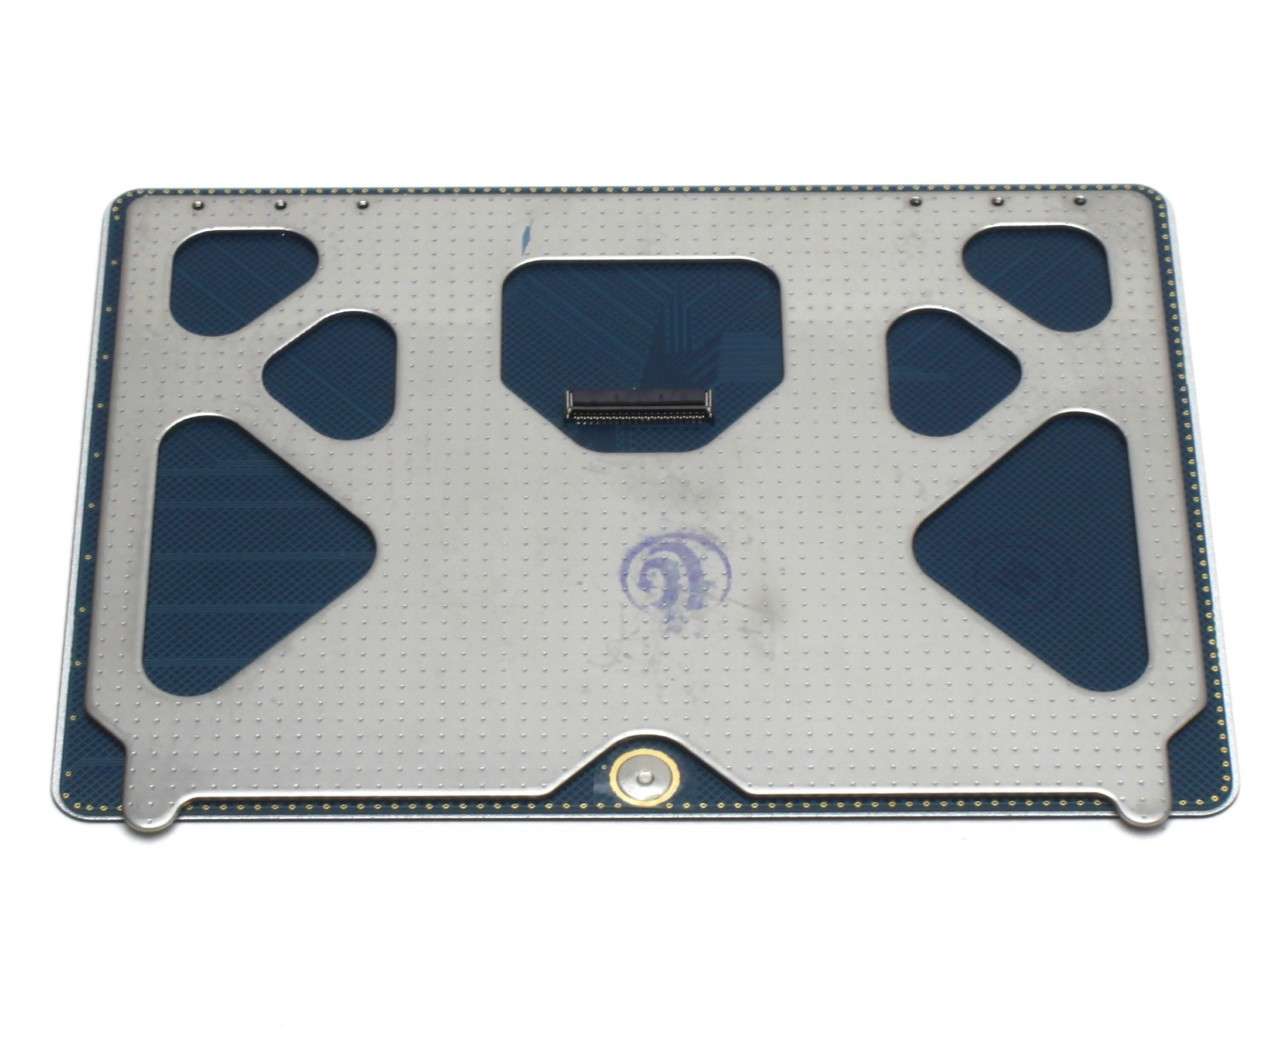 Touchpad Apple Macbook Pro Unibody 13 A1278 Late 2011 Trackpad